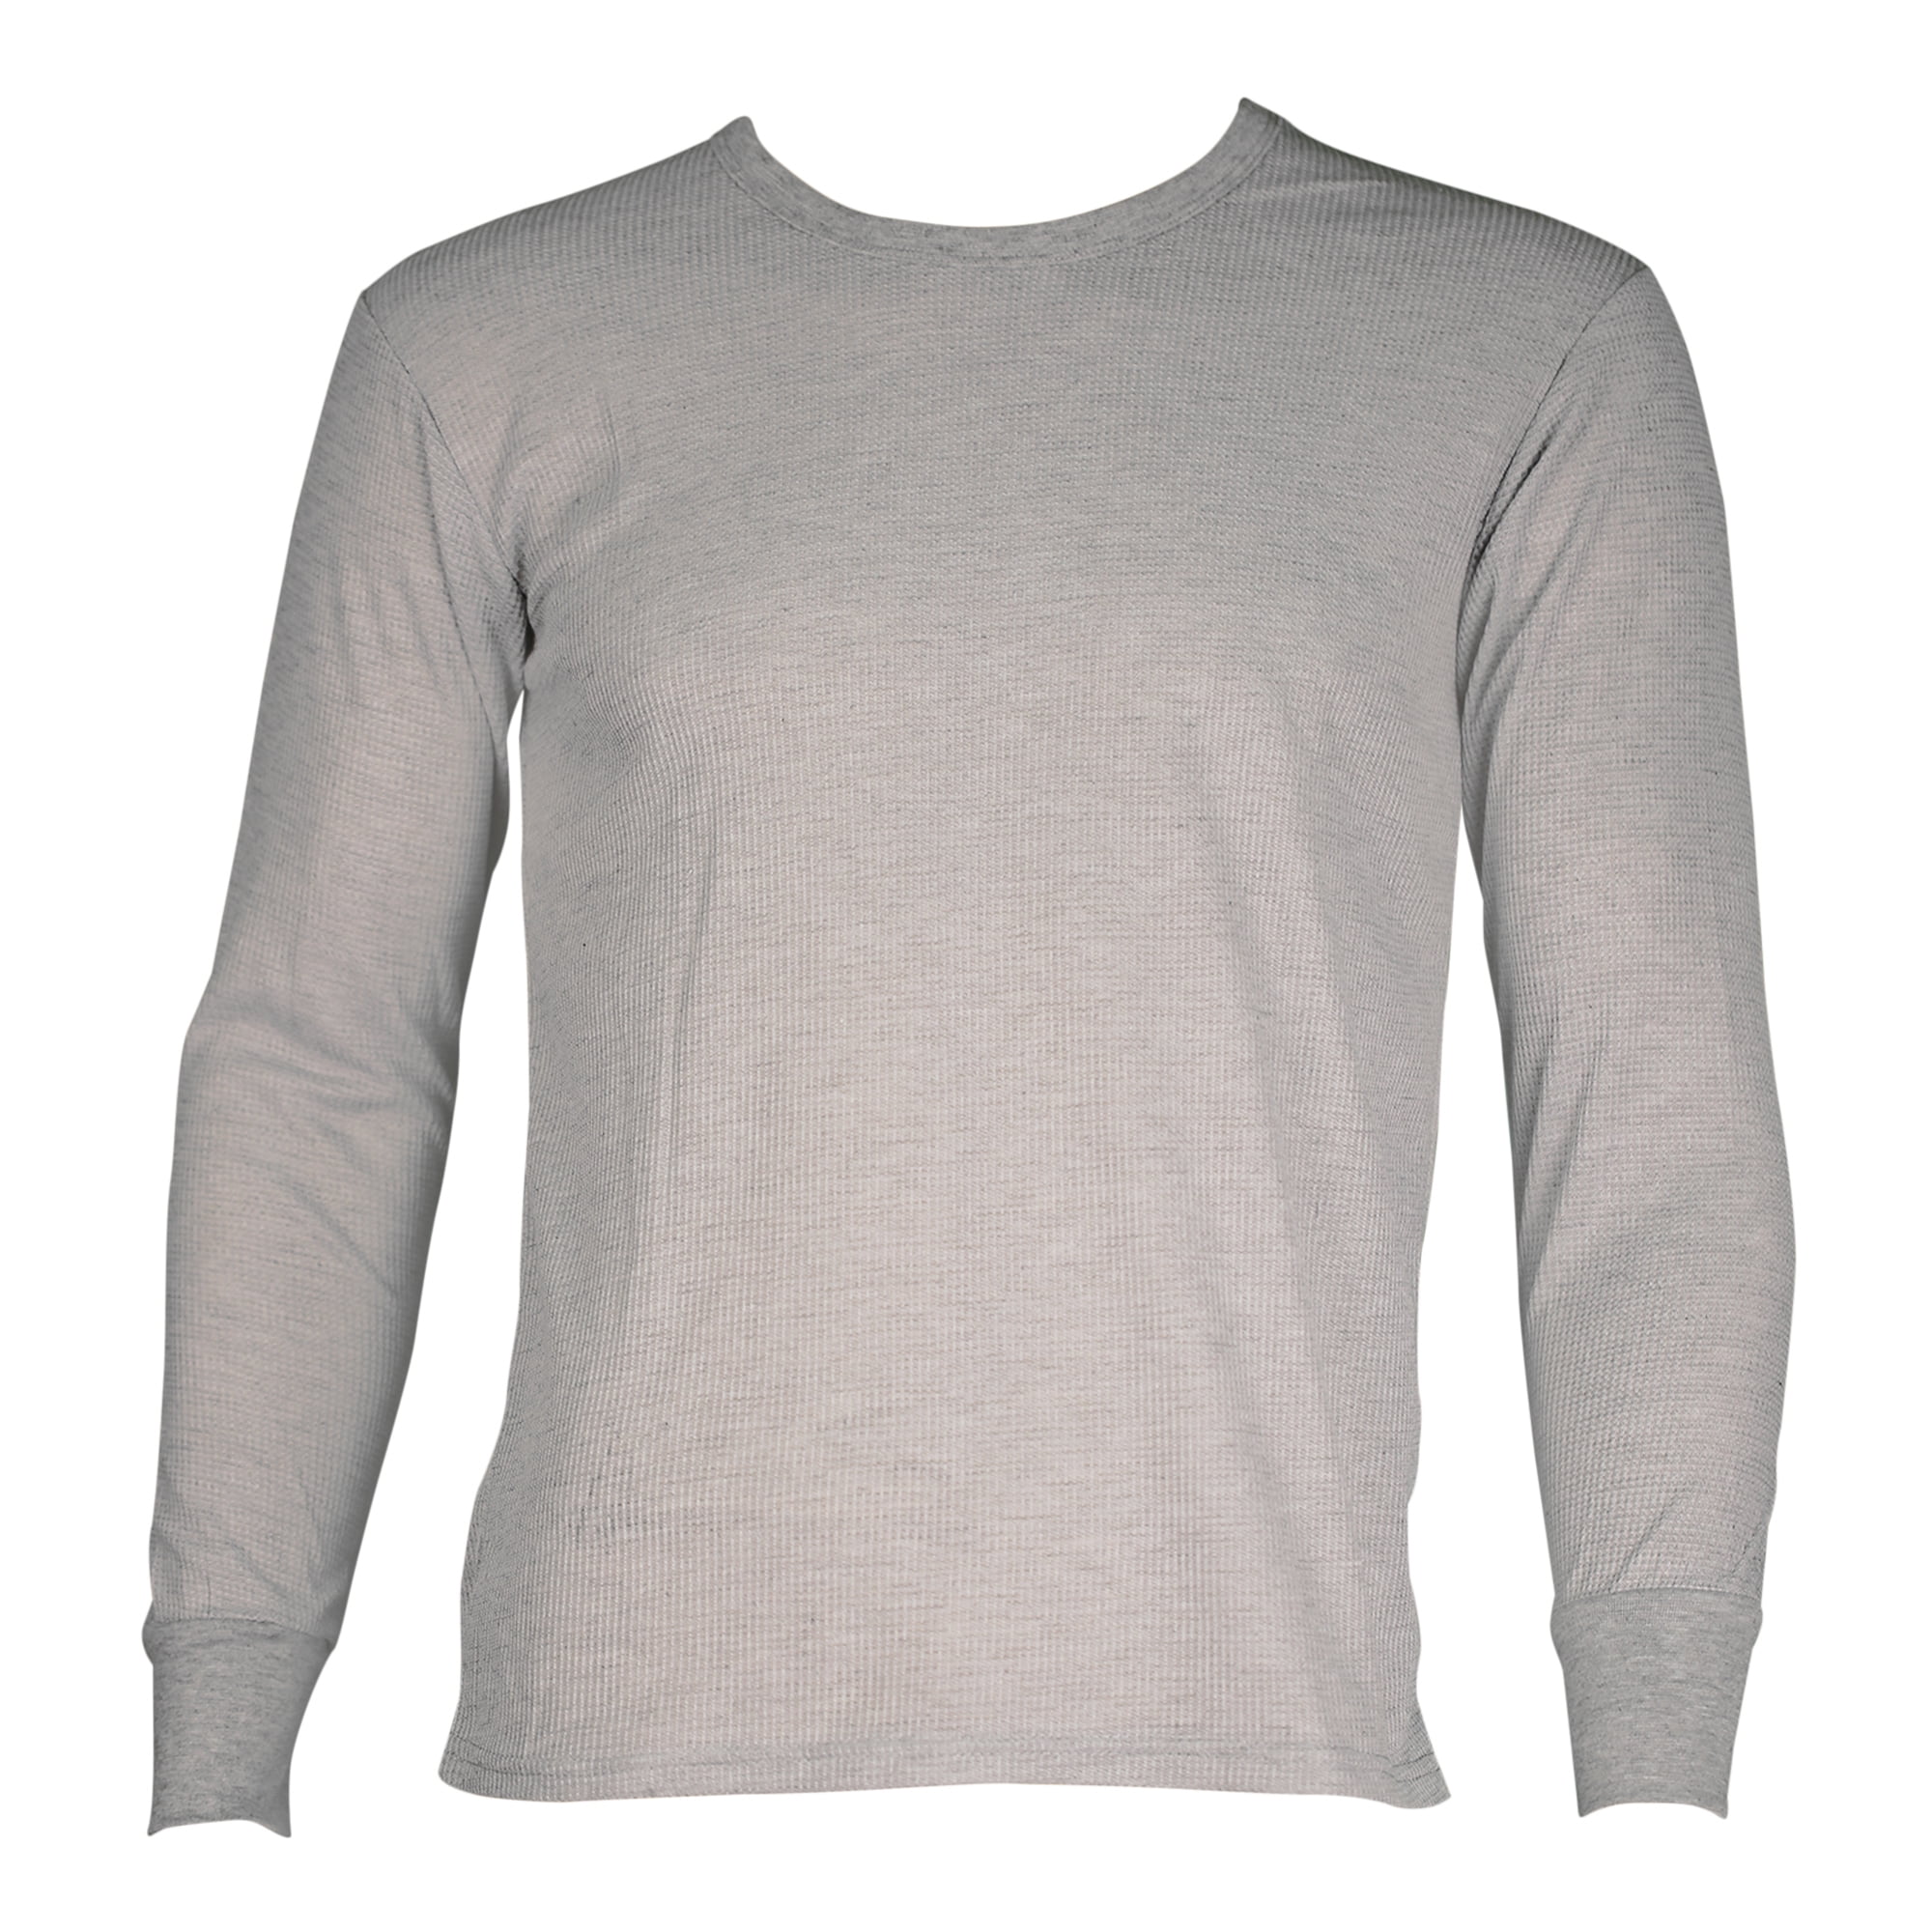 PRO 5 Apparel 100% Cotton Thermal Knit Tops White 3 Pack